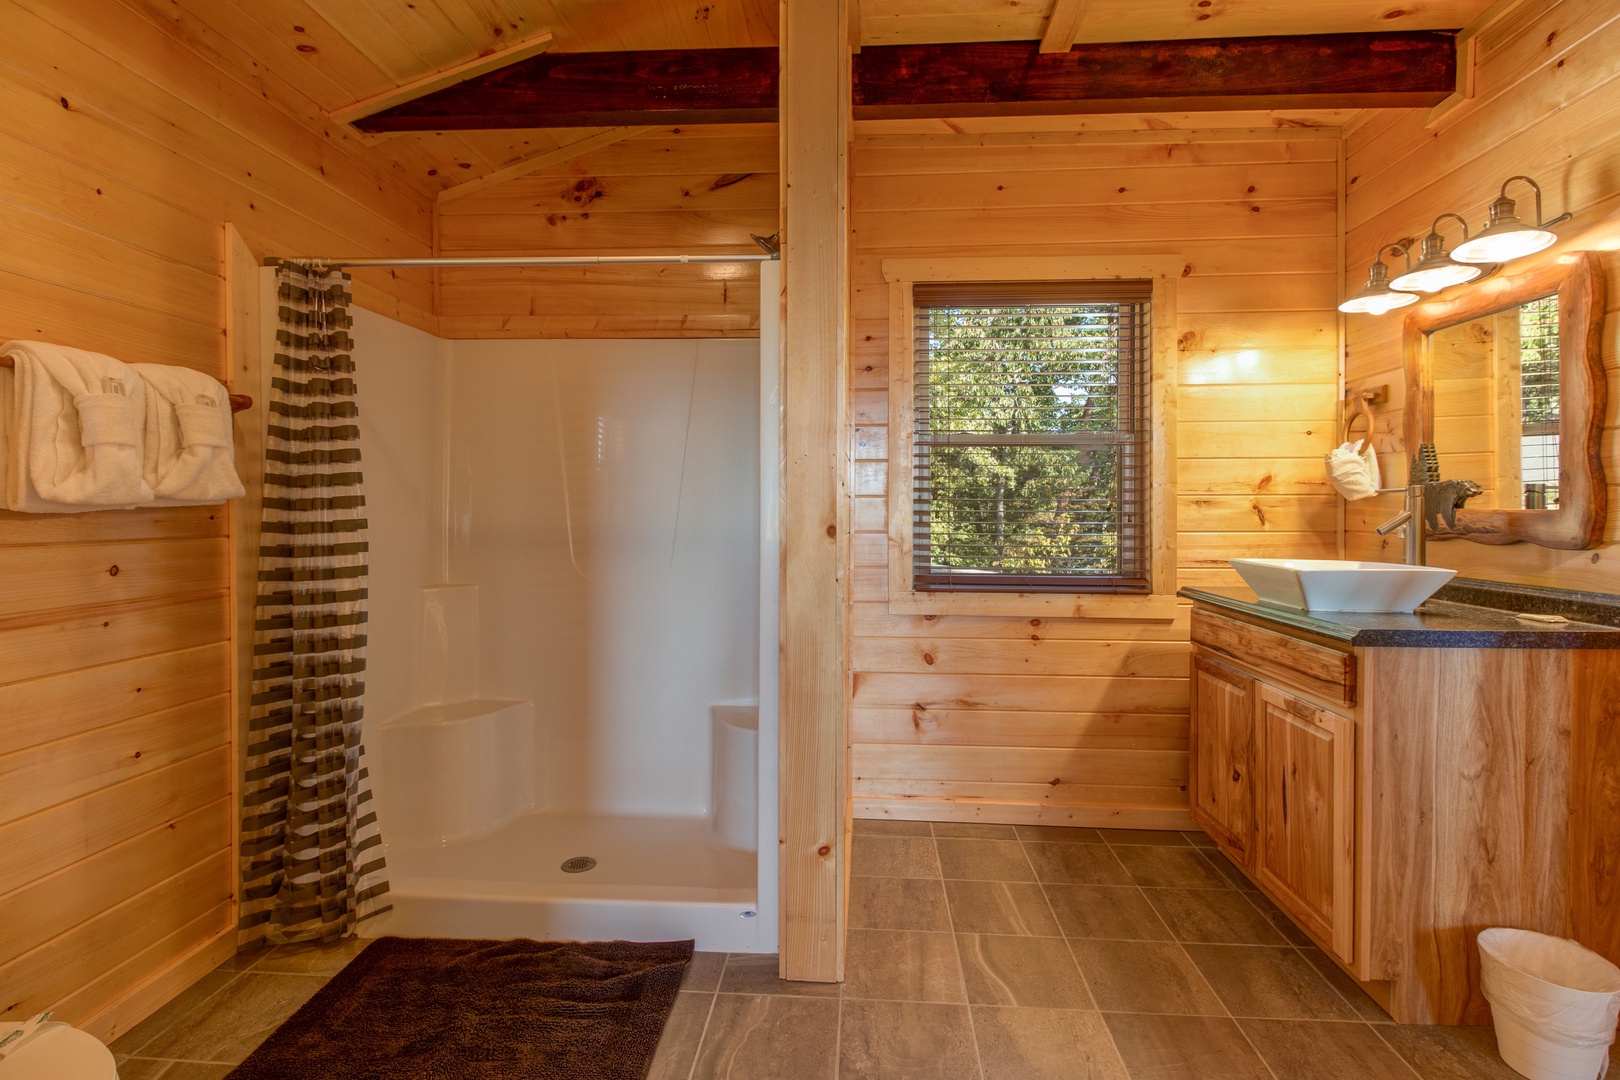 Bathroom with a shower stall at Canyon Camp Falls, a 2 bedroom cabin rental located in Pigeon Forge